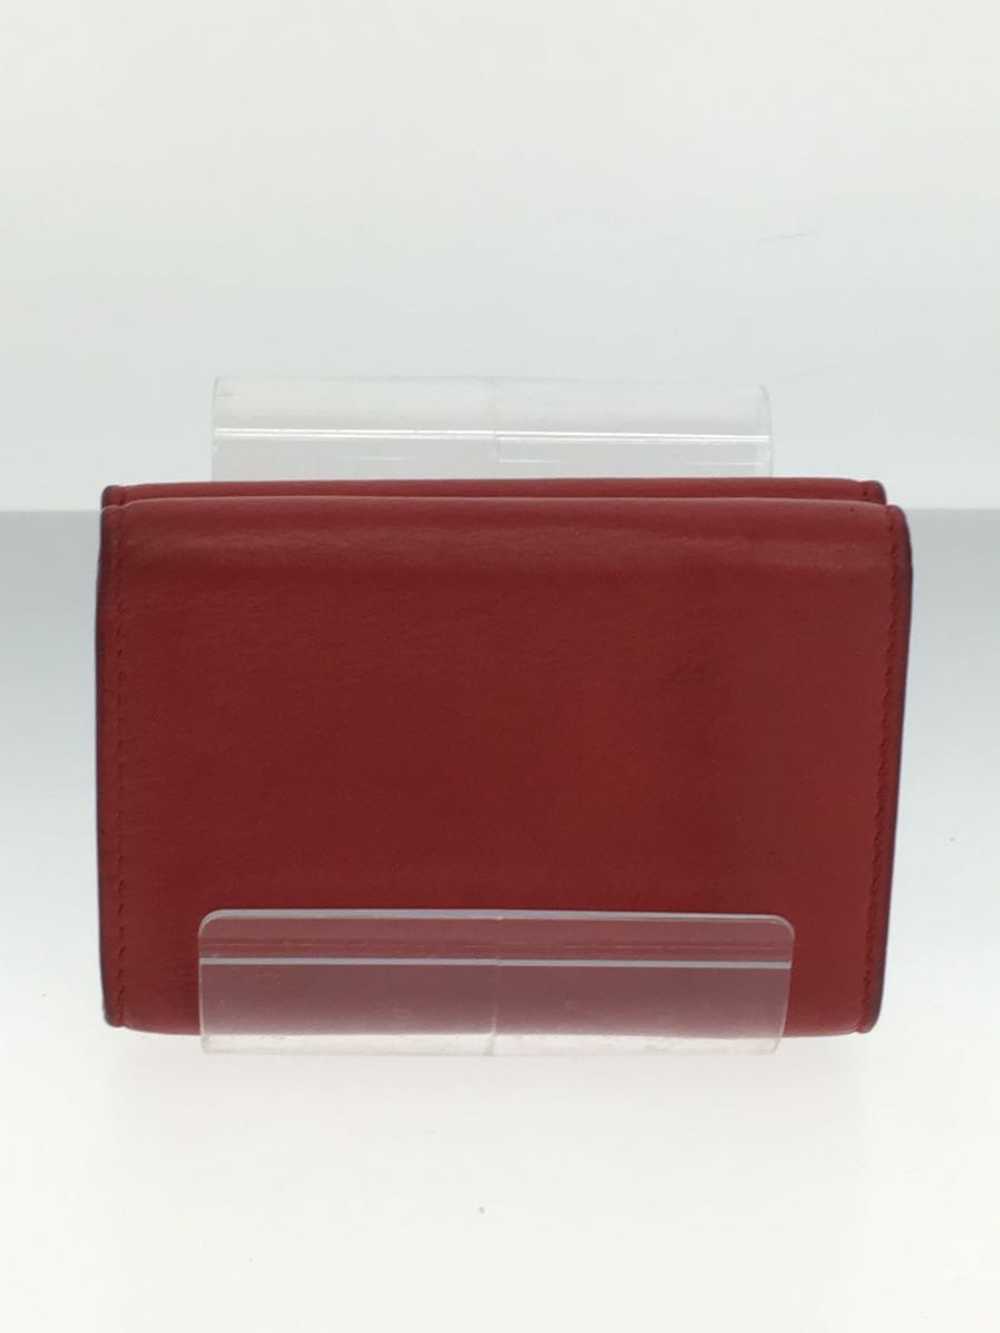 Balenciaga Trifold Wallet Leather Red Women - image 2